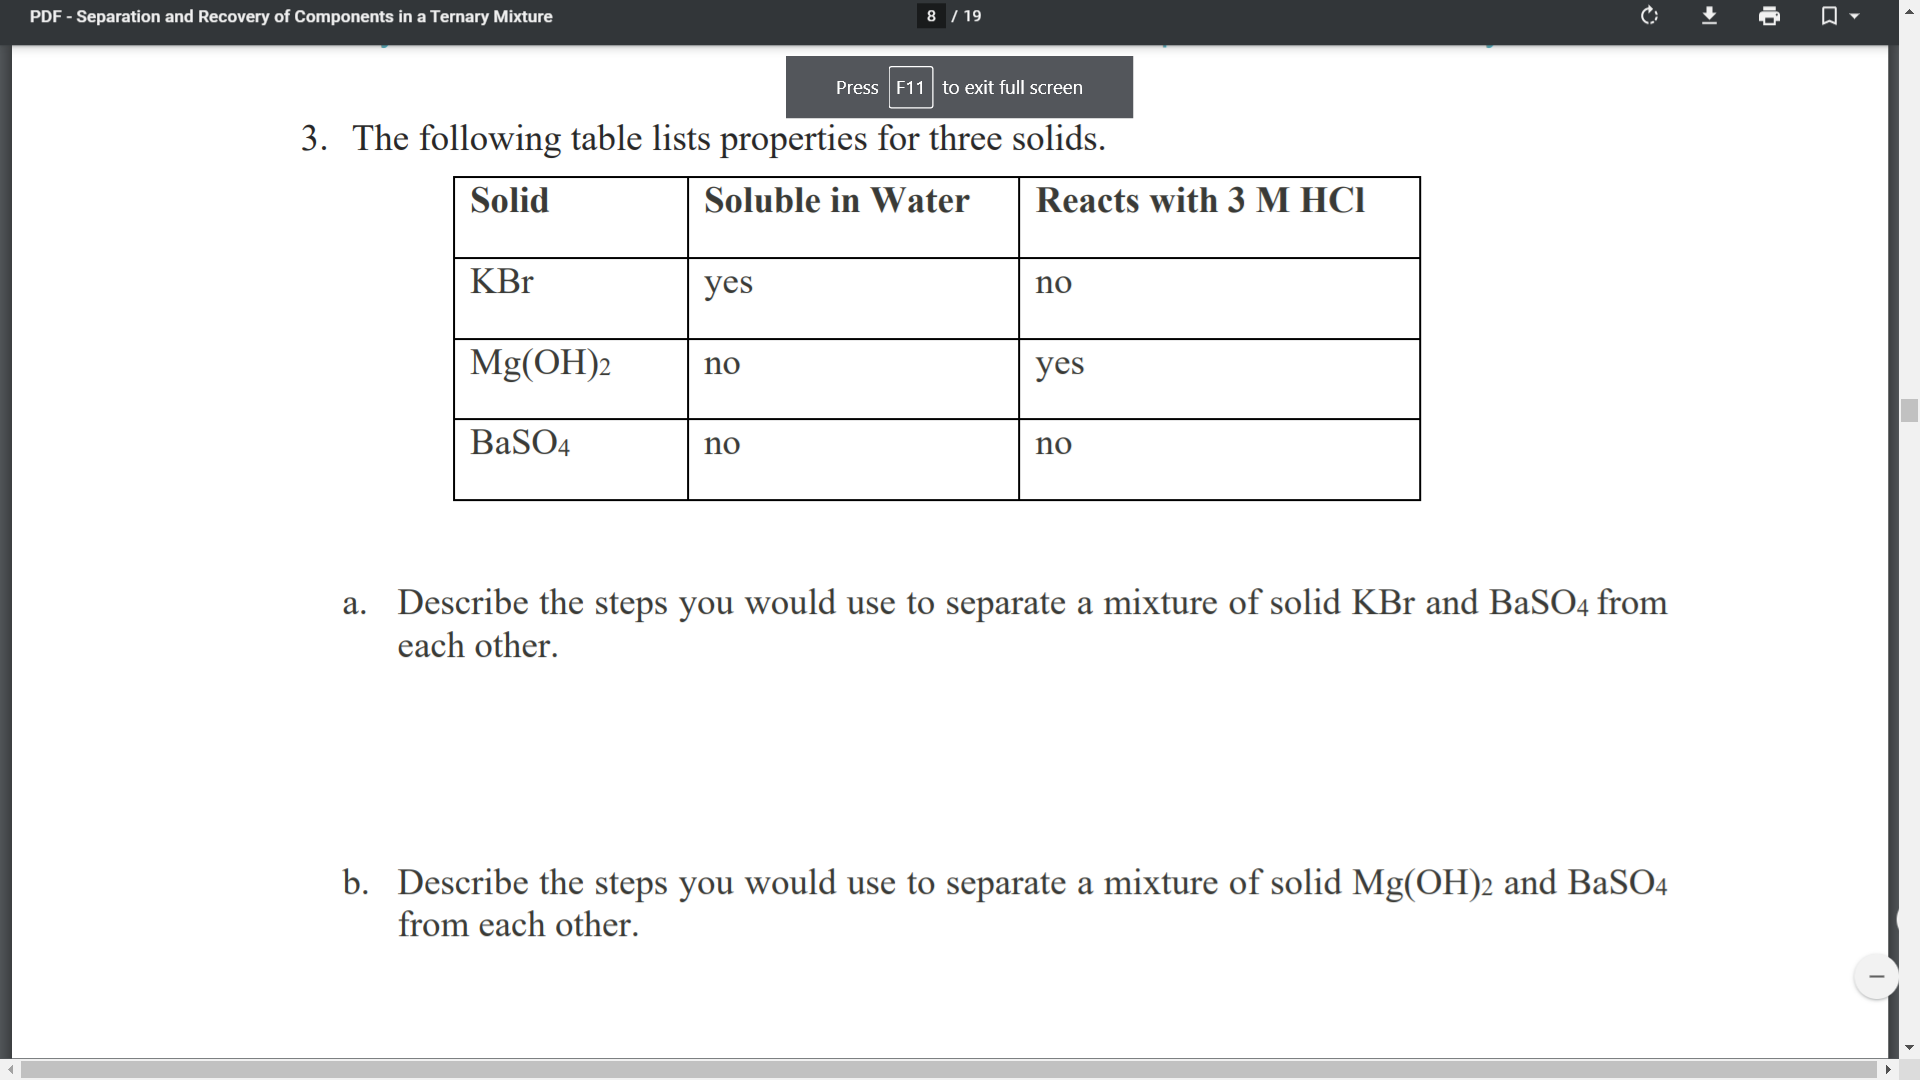 Describe the steps you would use to separate a mixture of solid Mg(OH)2 and BaSO4
from each other.
